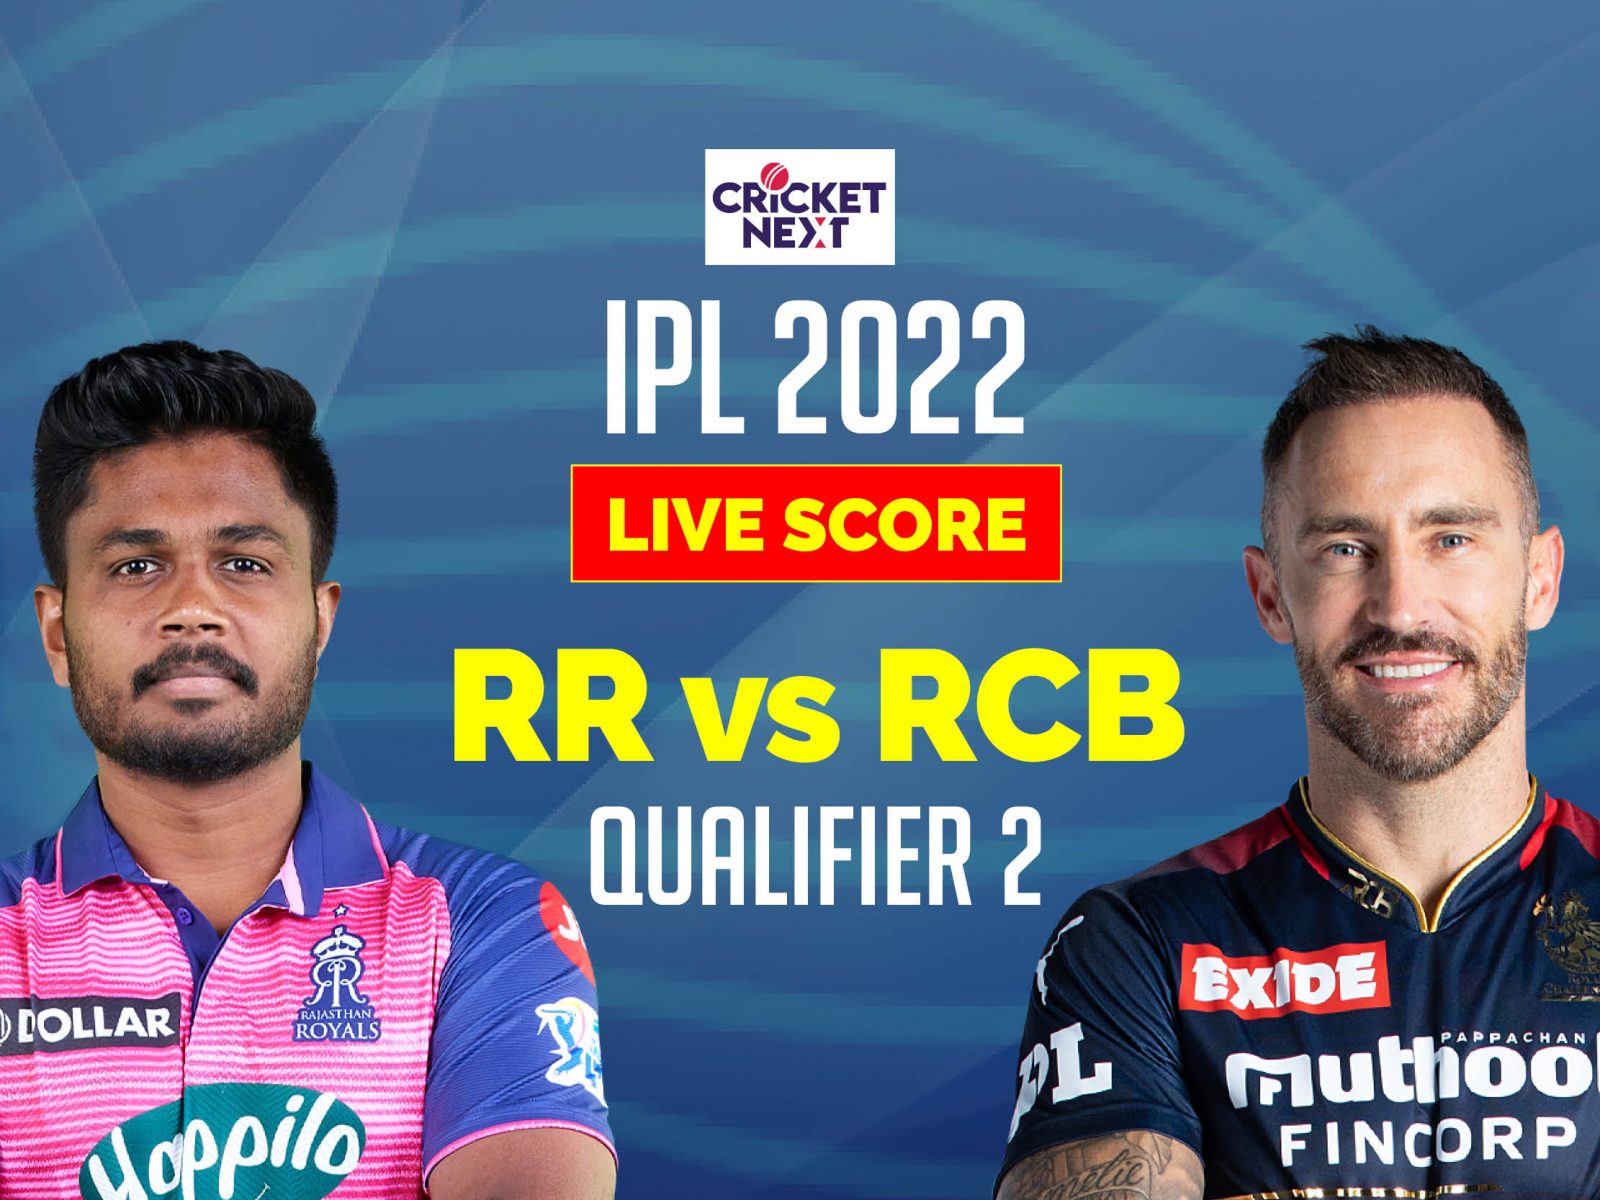 IPL 2022 Qualifier 2 Highlights RR vs RCB Latest Updates Jos Buttlers Record-equaling Century Fires Rajasthan Royals Into Final